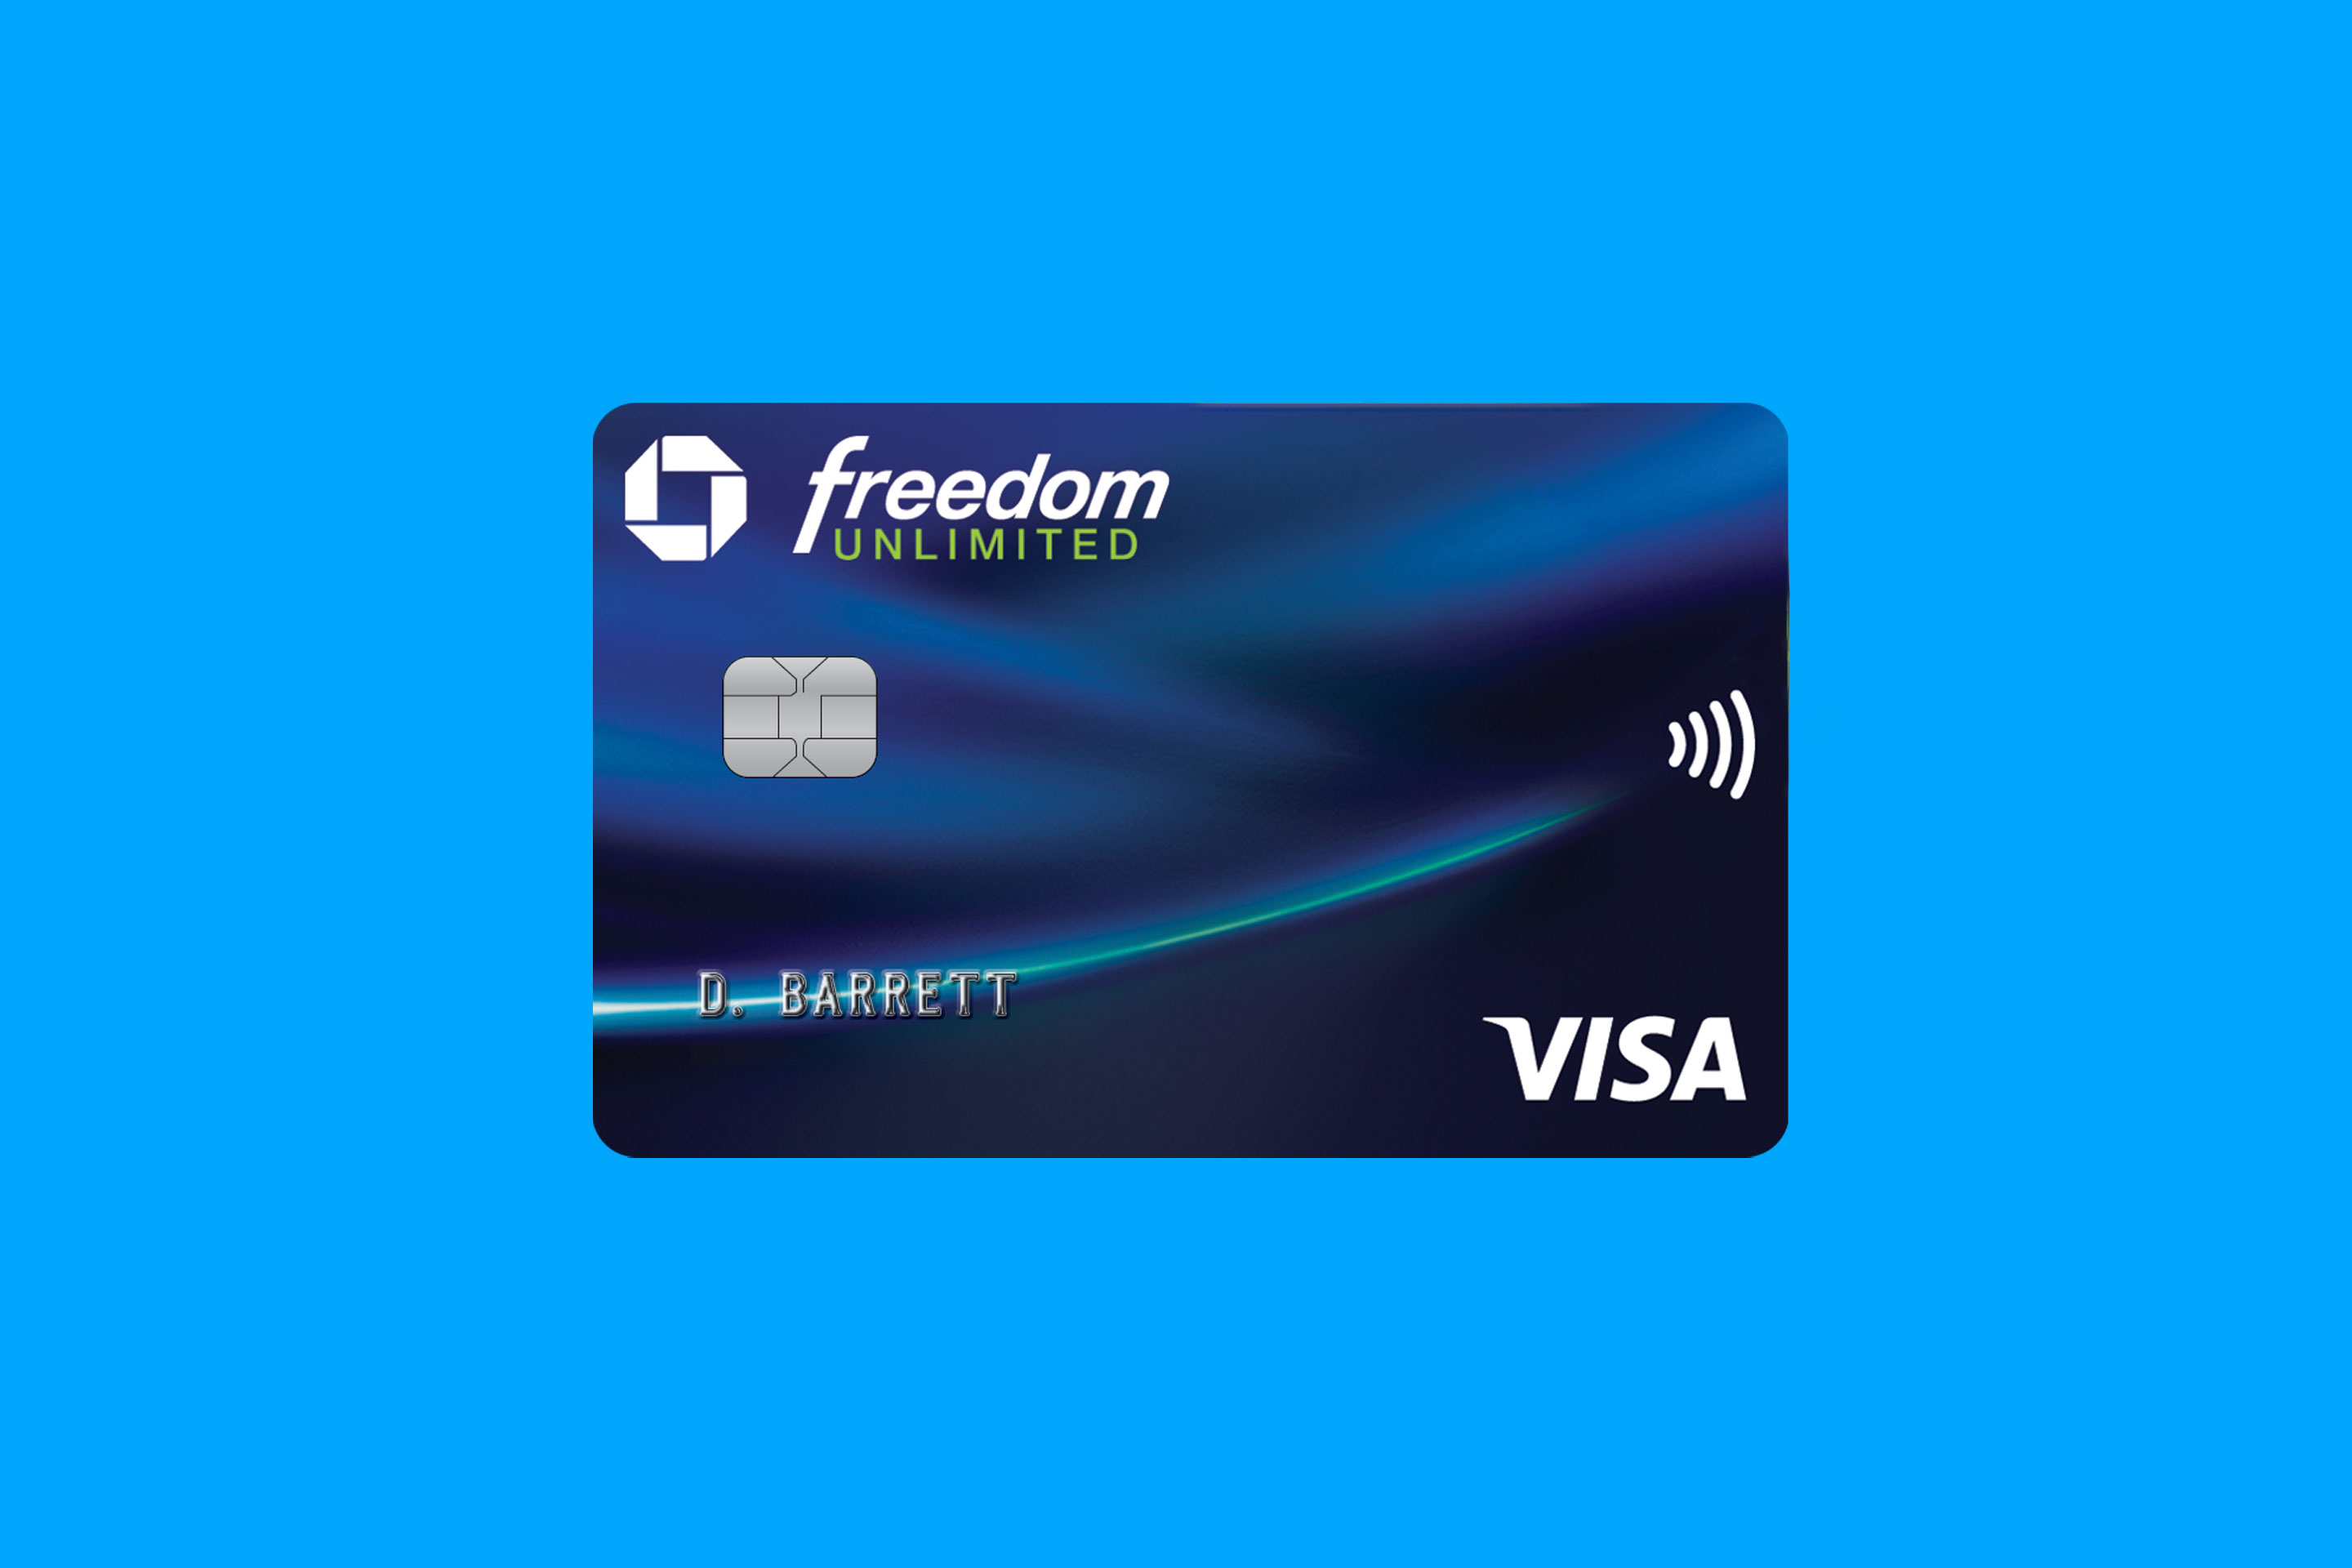 chase-freedom-unlimited-reviews-of-cash-back-credit-cards-money